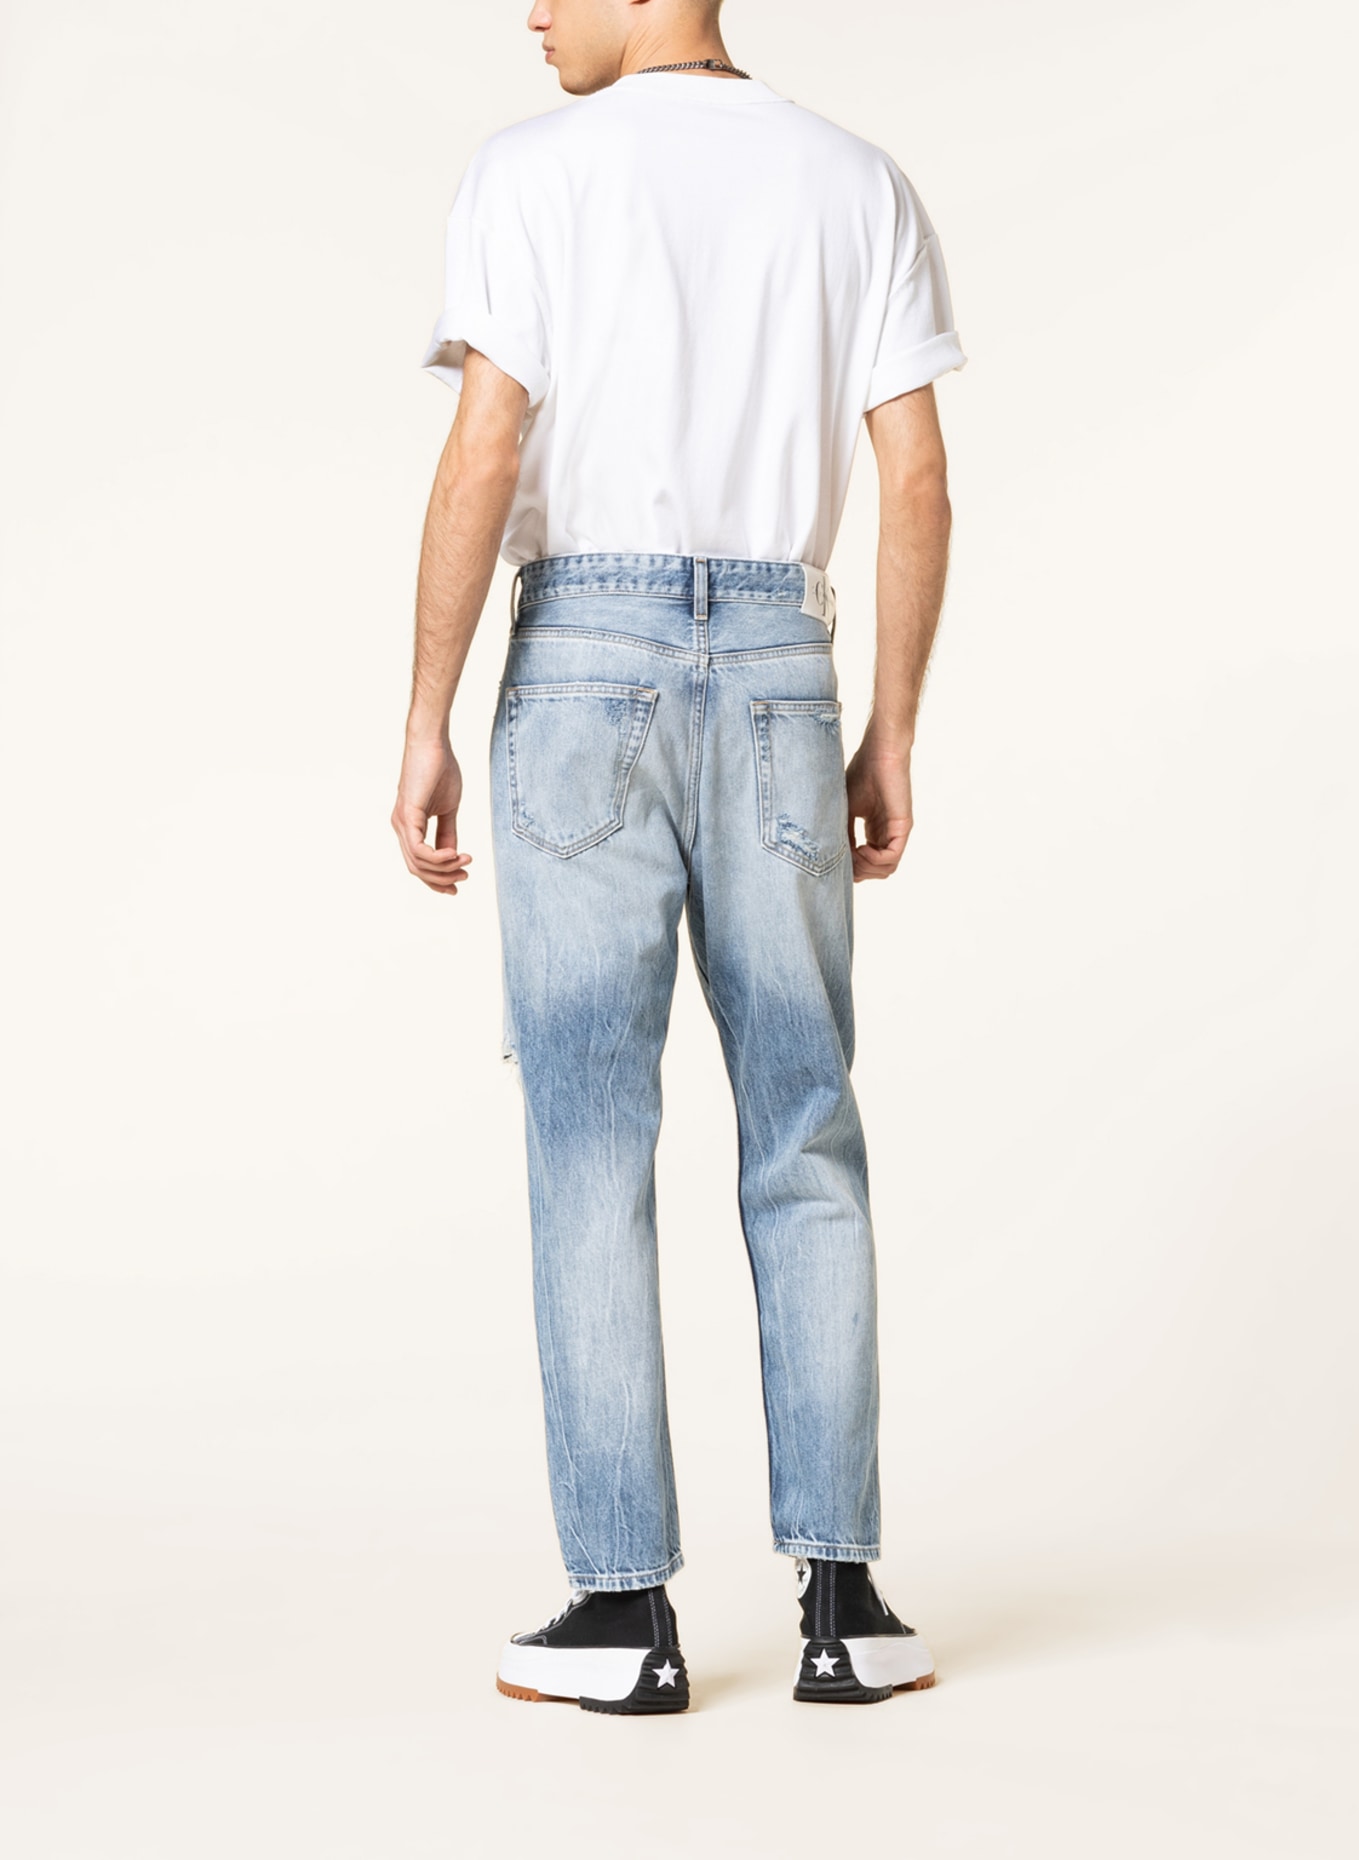 Calvin Klein Jeans Jeans DAD JEAN Relaxed Fit , Farbe: 1AA Denim Light (Bild 3)